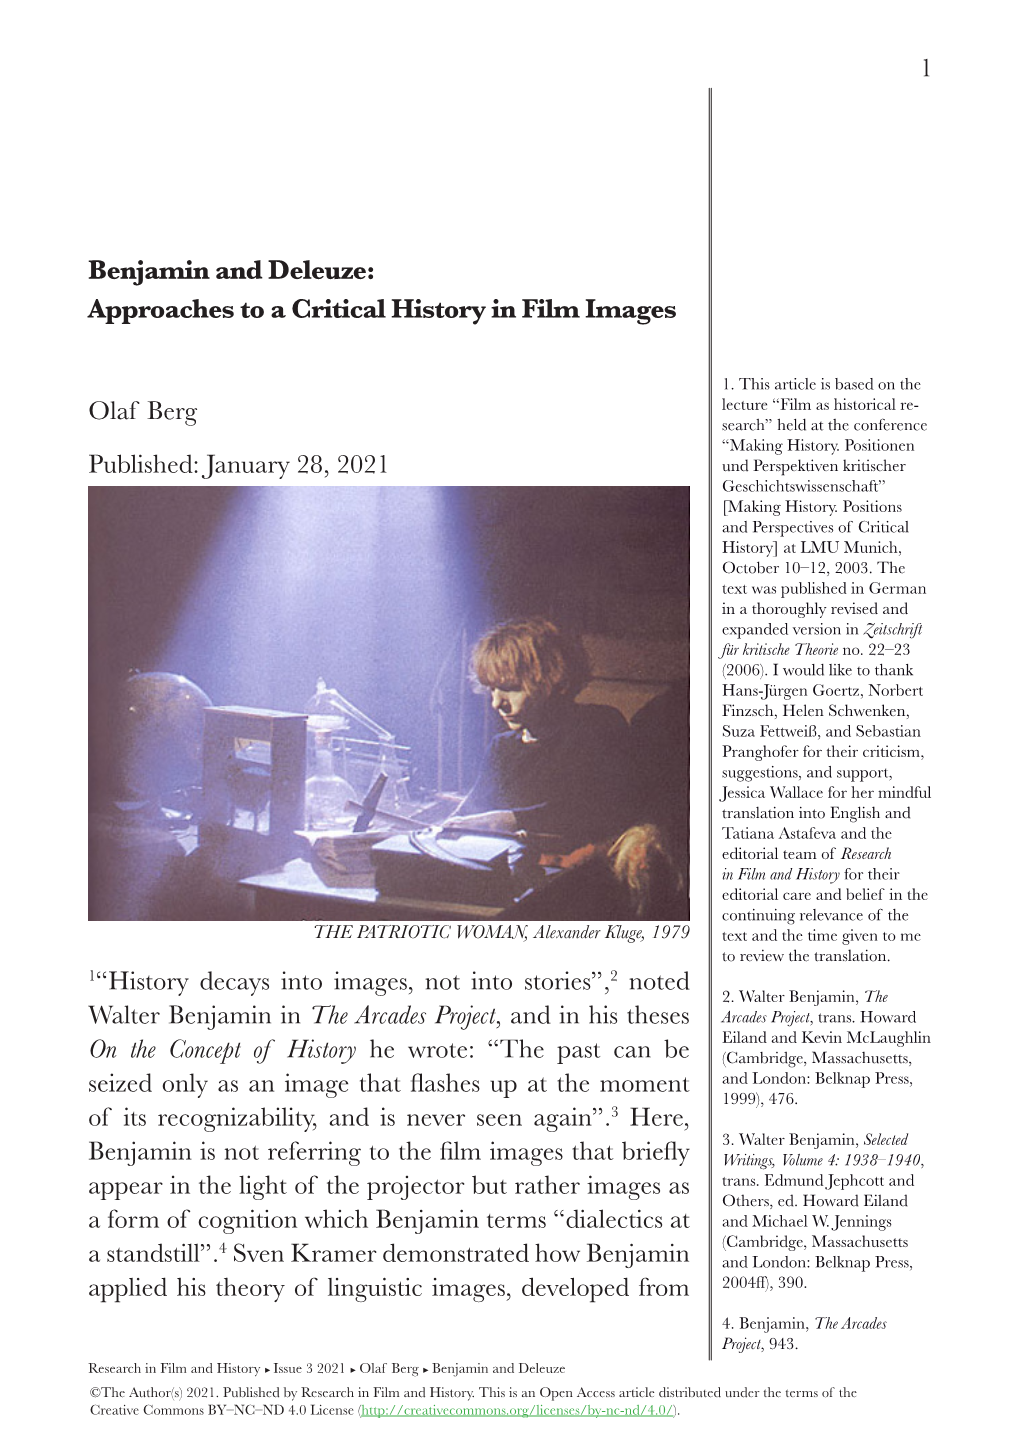 Benjamin and Deleuze: Approaches to a Critical History in Film Images